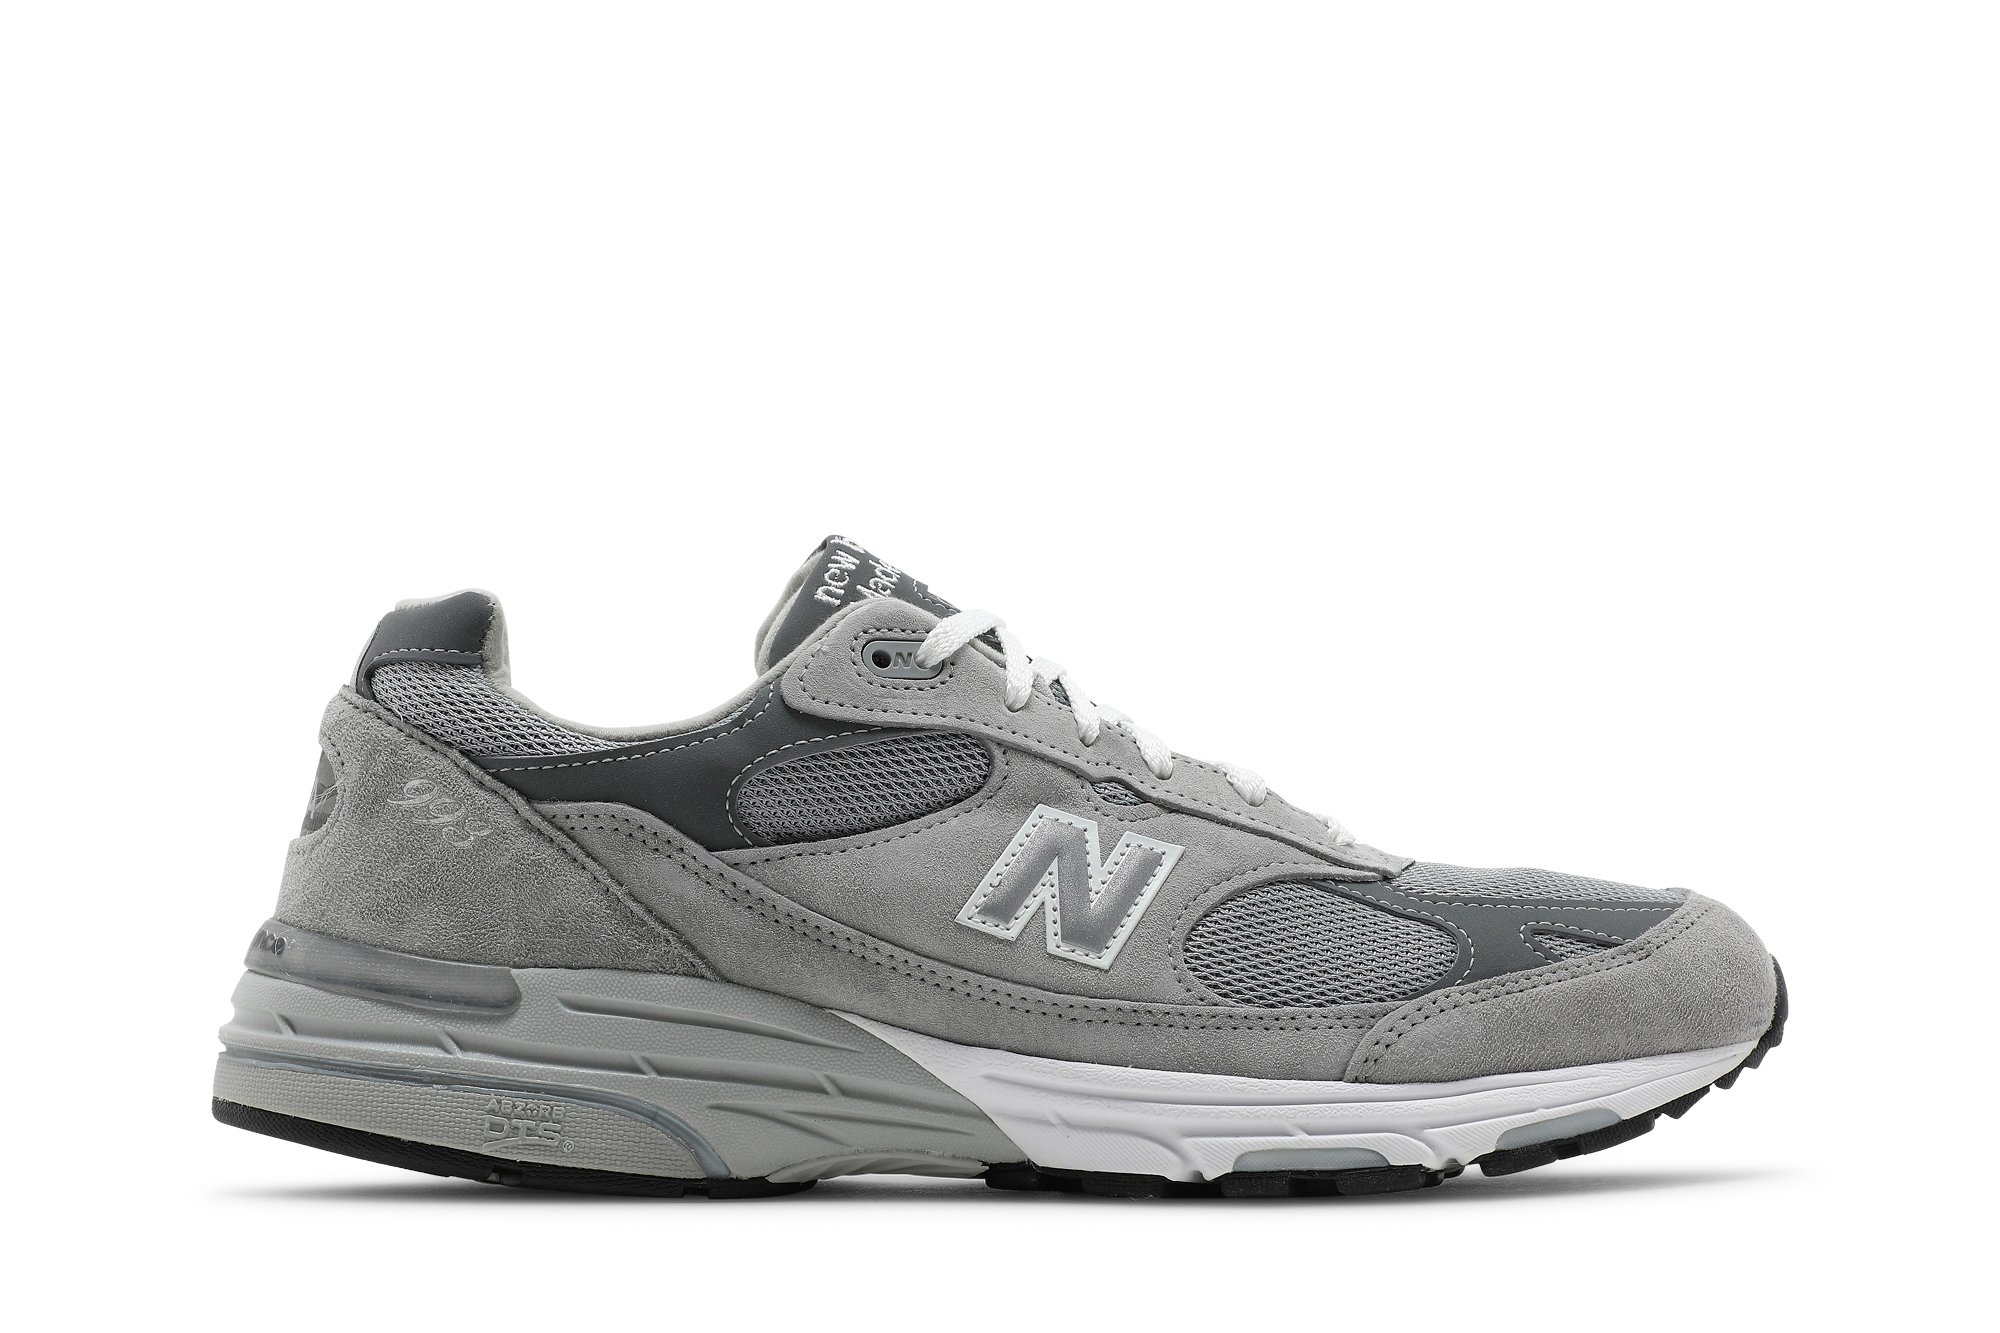 New Balance Men's Made in US 993 - Grey/White (Size 10.5 Narrow)